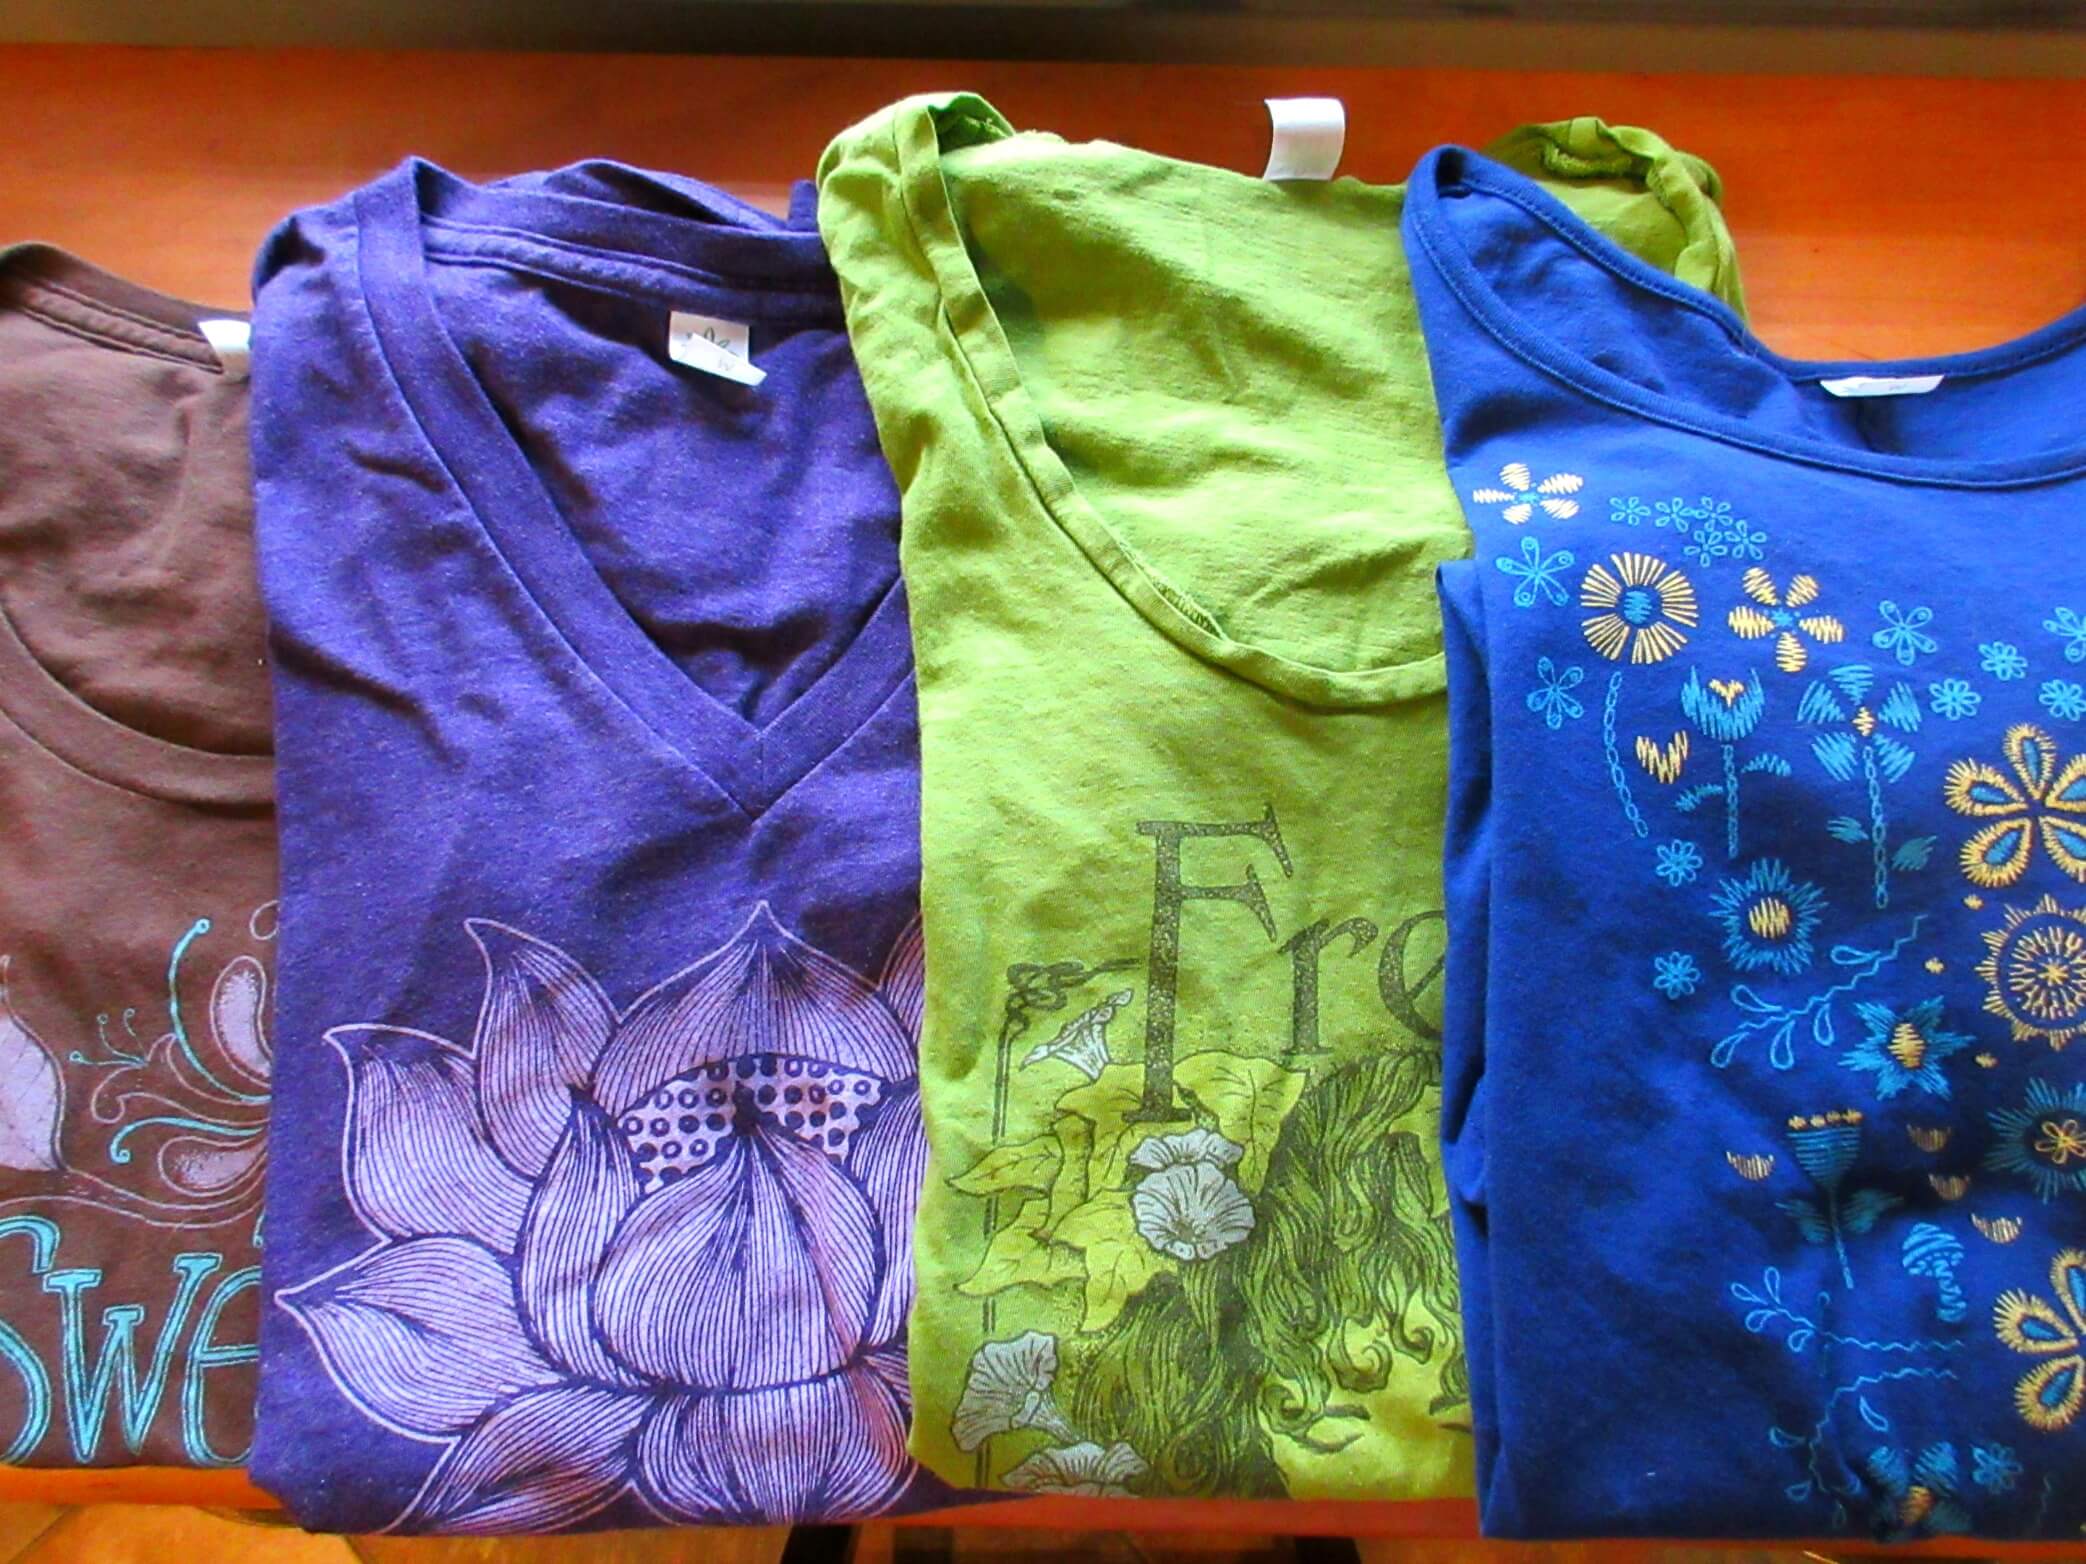 Soul Flower t shirts - 12 Things to do with Clothes You No Longer Wear